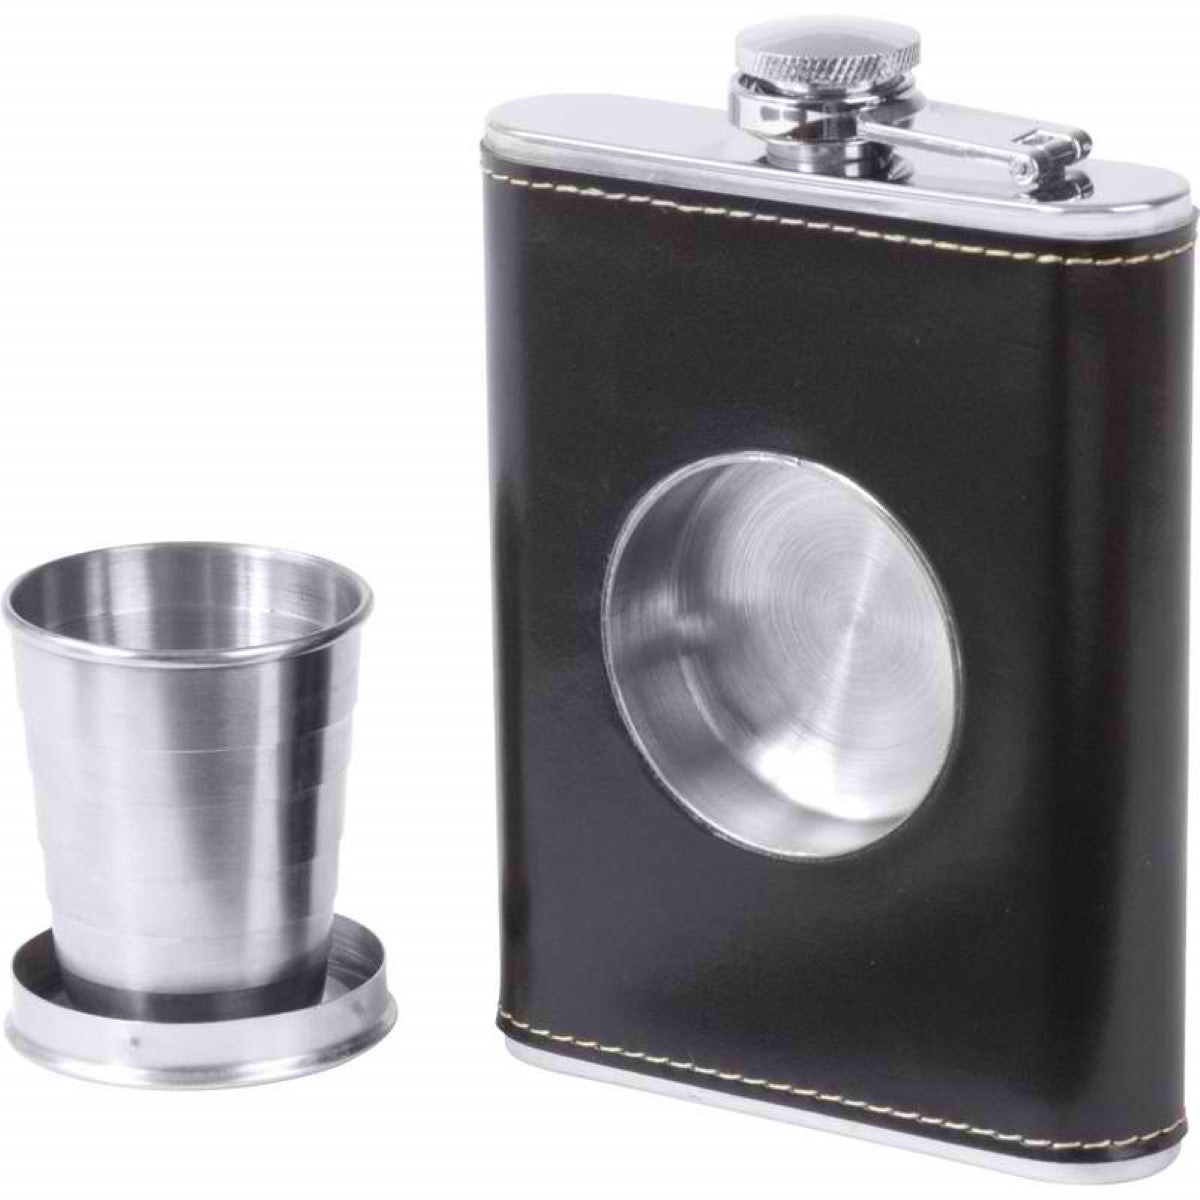 Jillian 6.8oz Stainless Steel Flask with Built-In Cup